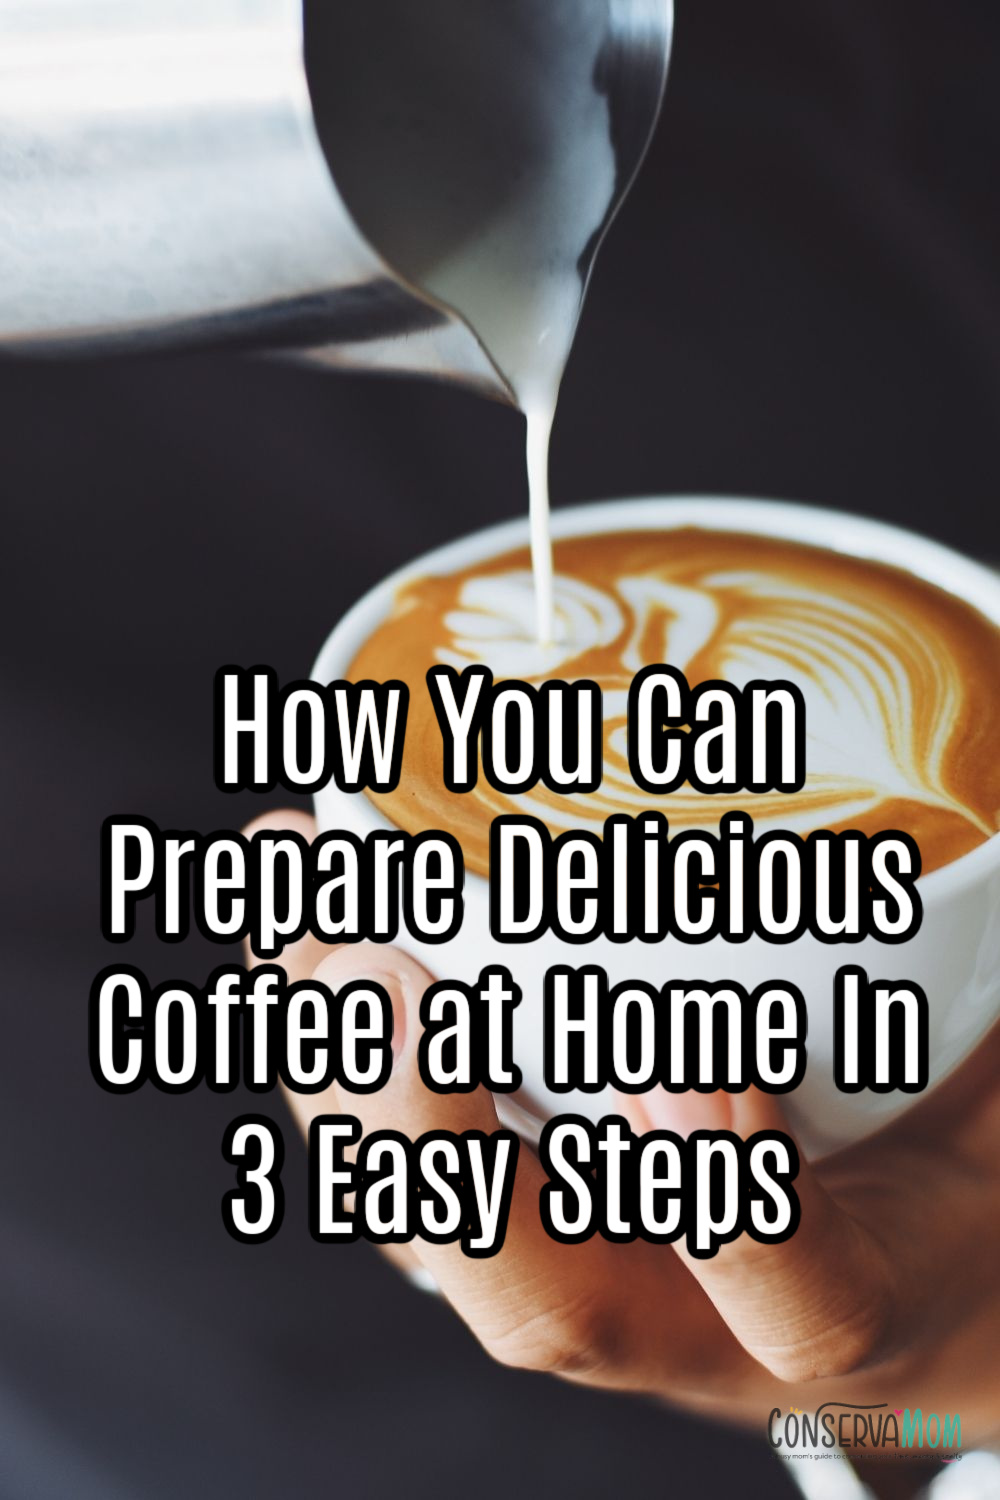 How You can Prepare Delicious Coffee at Home In 3 Easy Steps